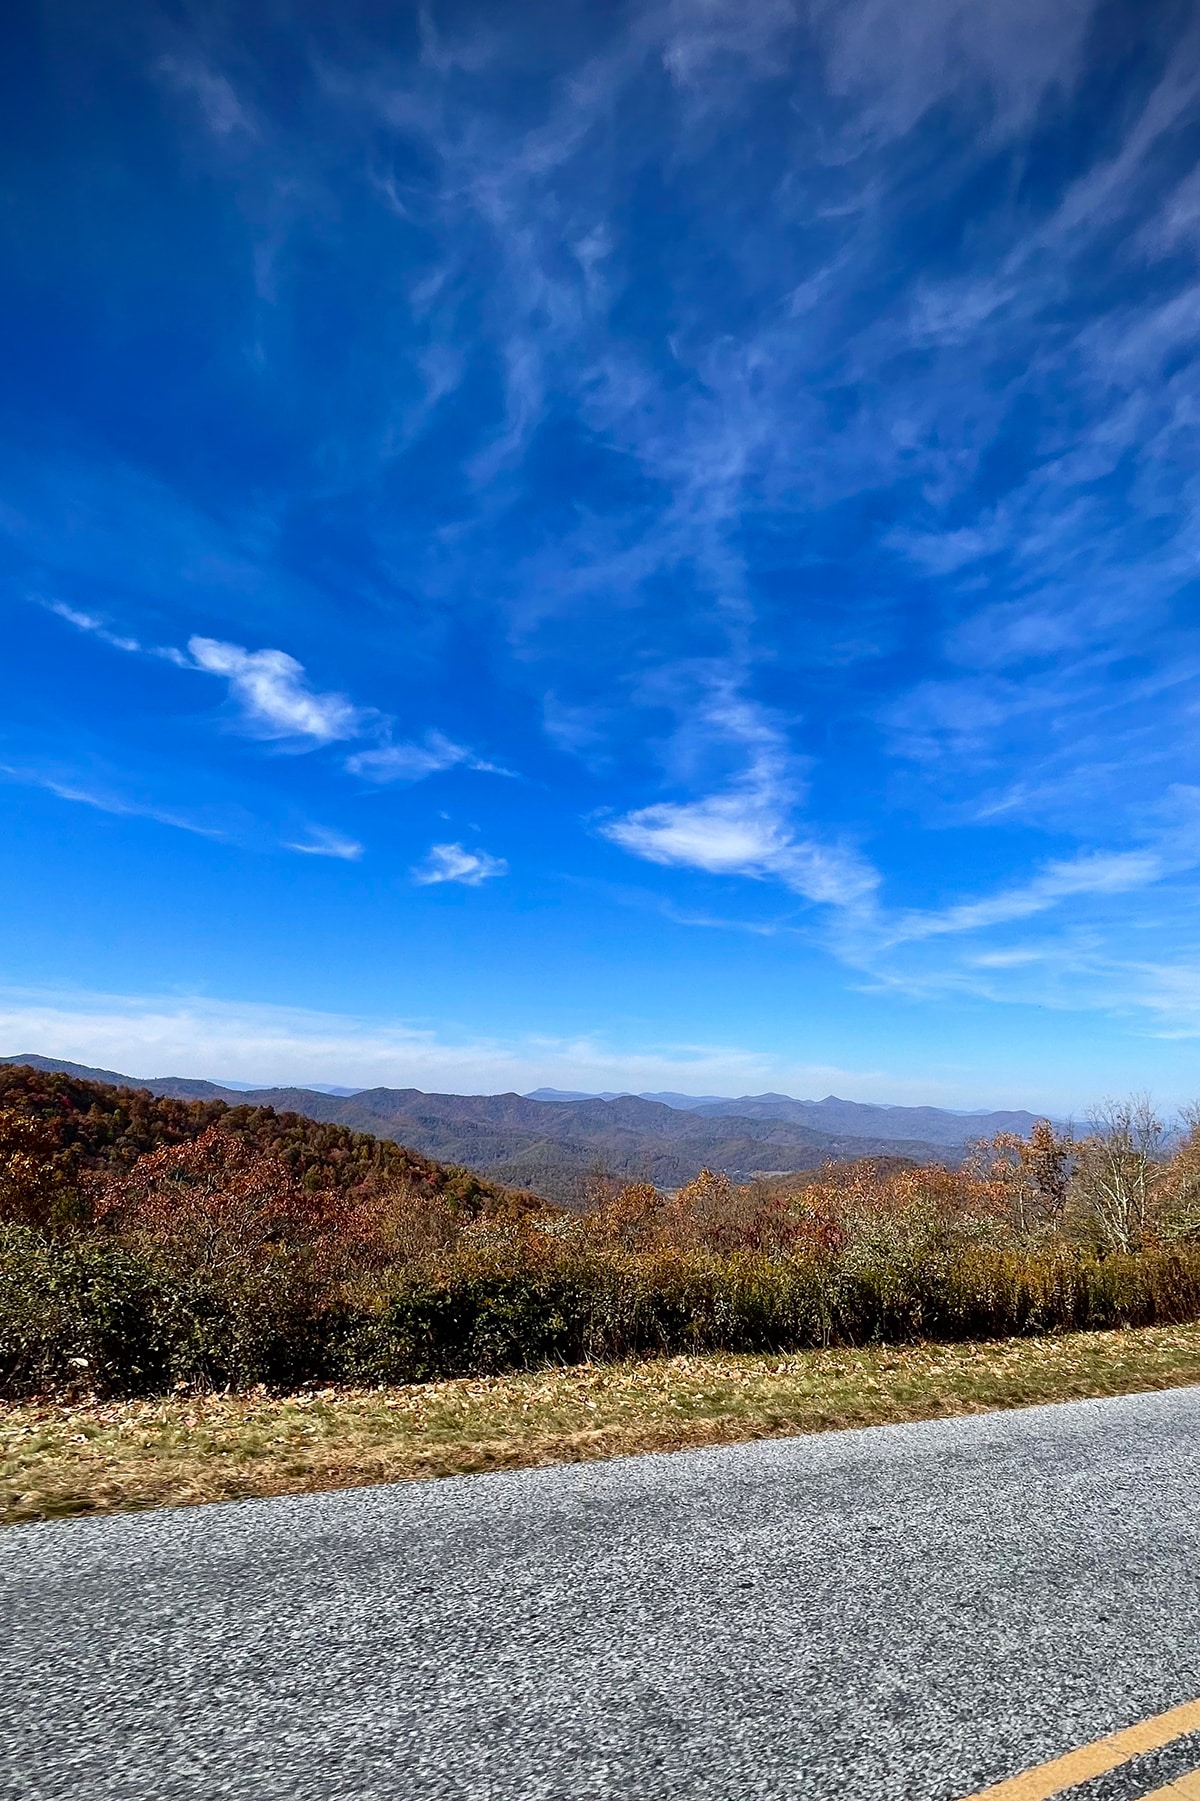 The view from a section of the Blue Ridge Parkway in North Carolina.